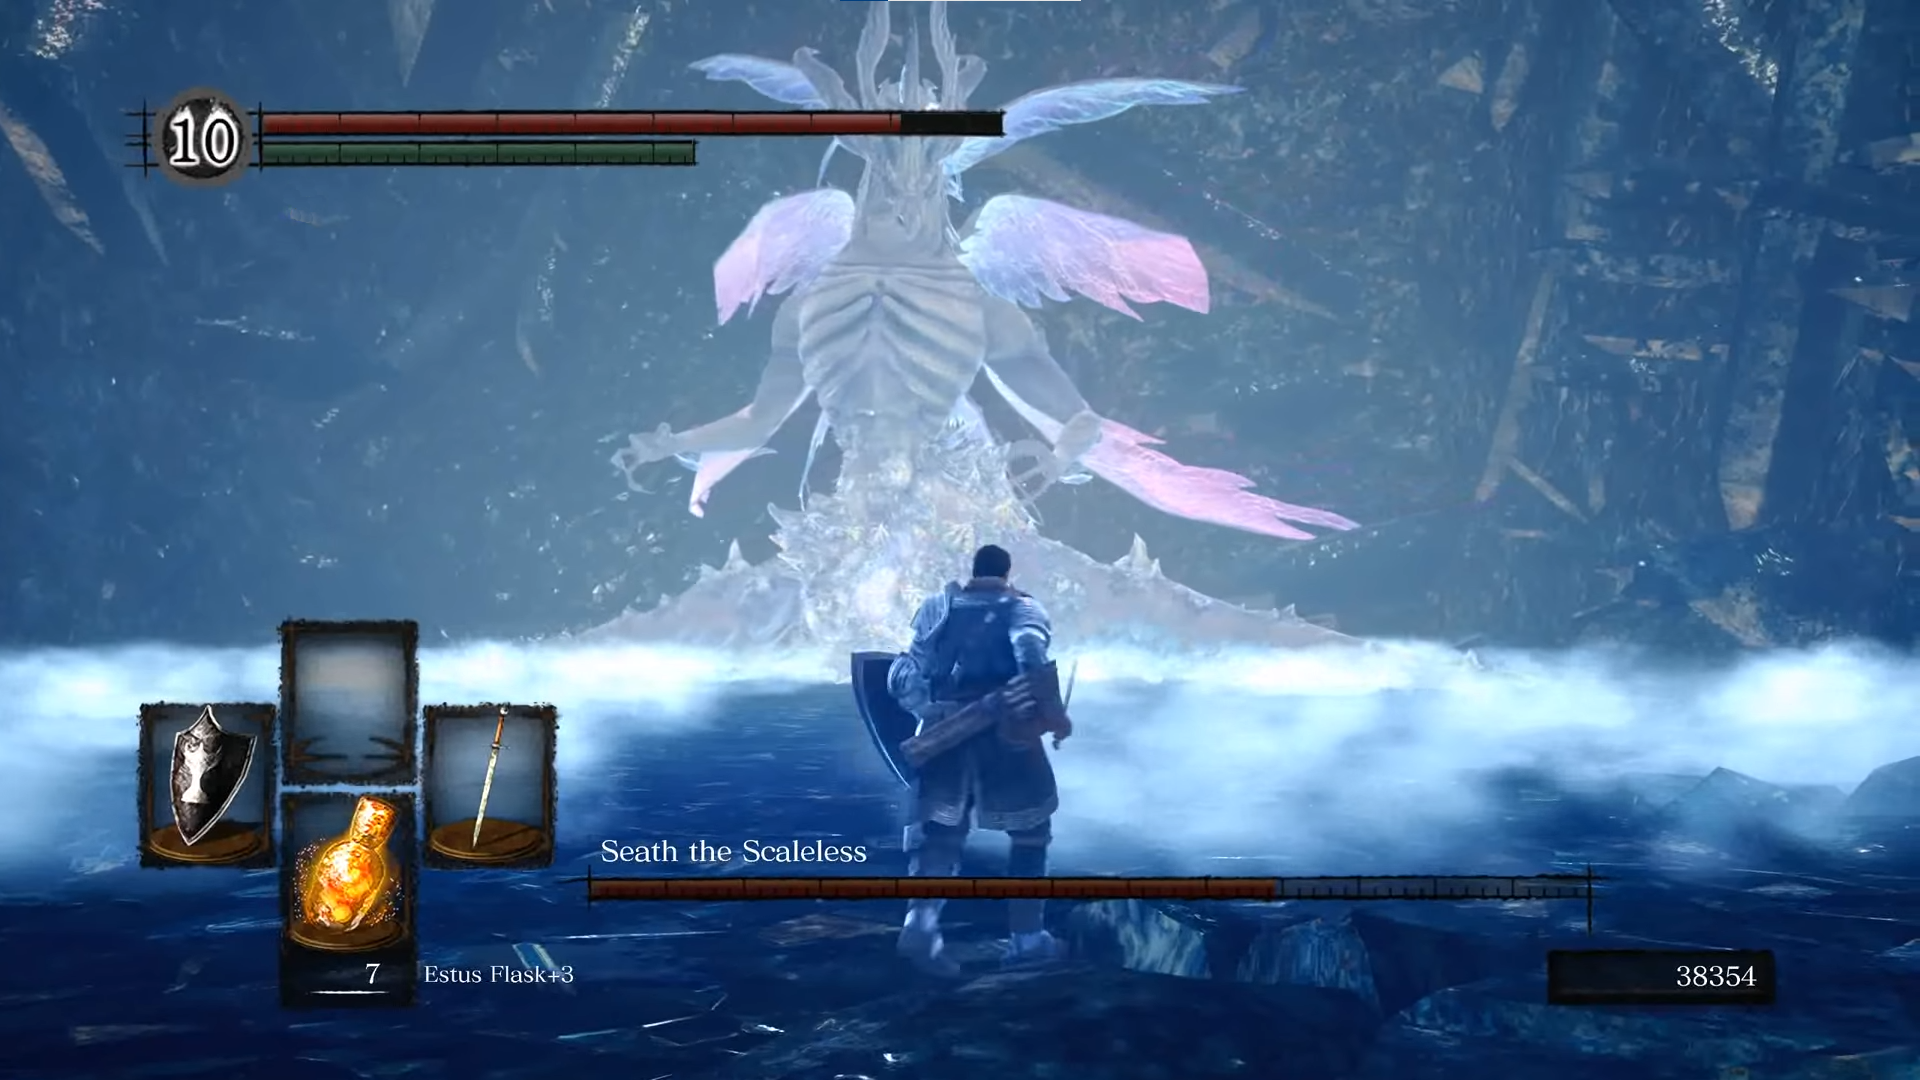 A screenshot from the video game Dark Souls. The protagonist is fighting a large dragon called Seath the Scaleless.